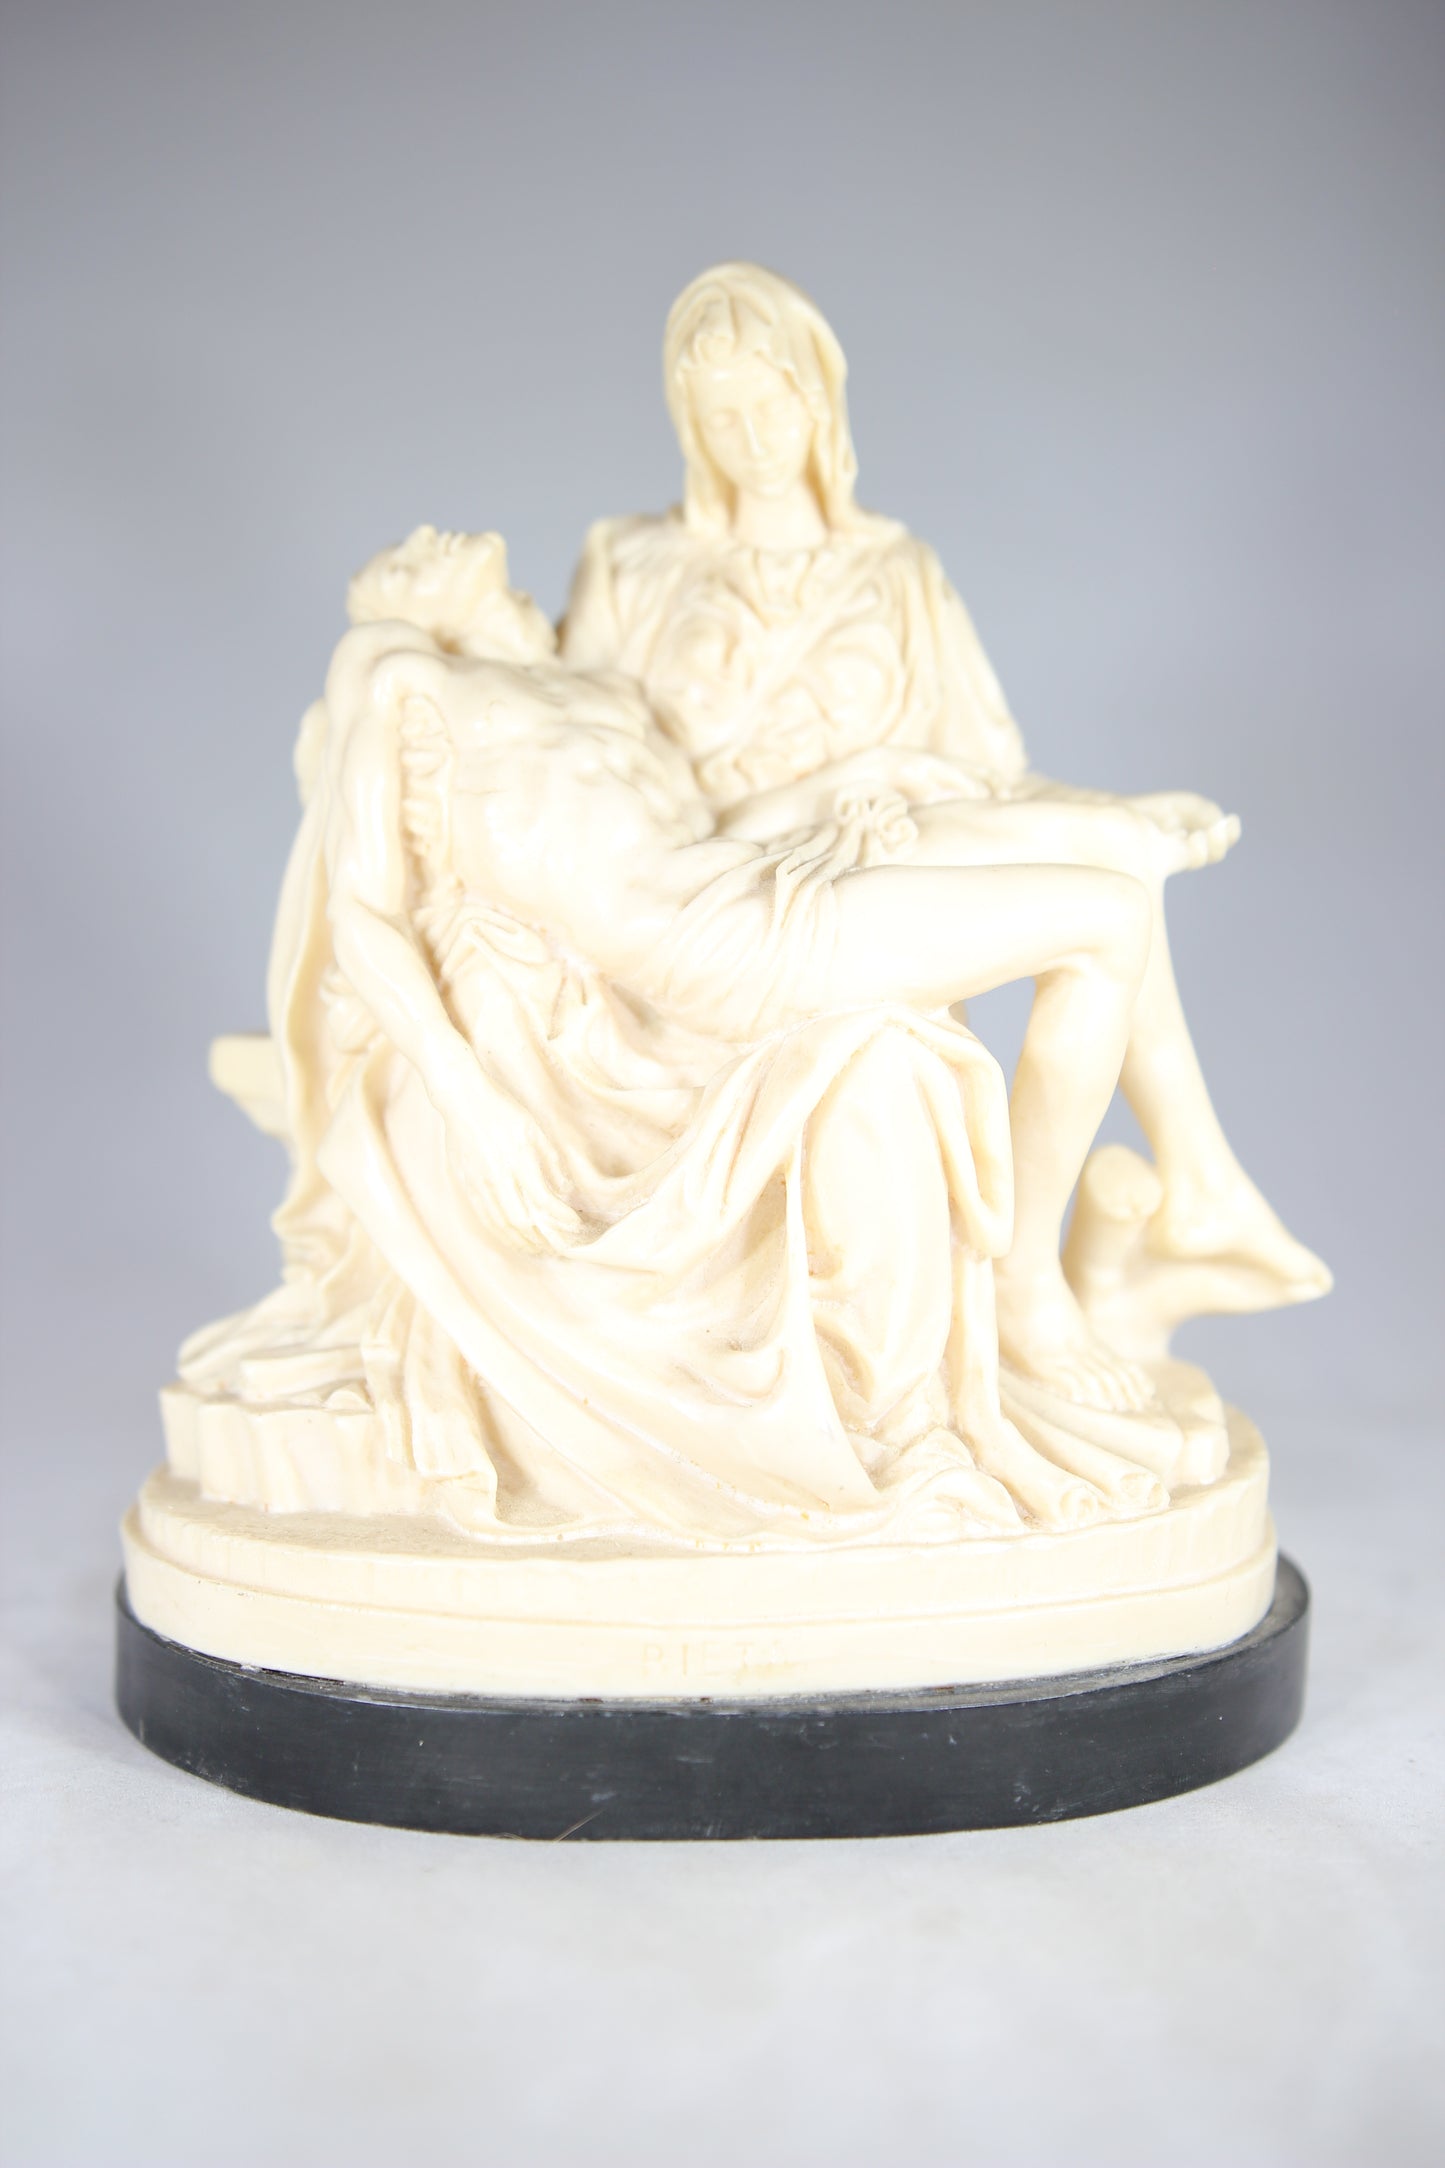 Heavy "Pieta" by A. Santini Sculpture Statue, Made in Italy